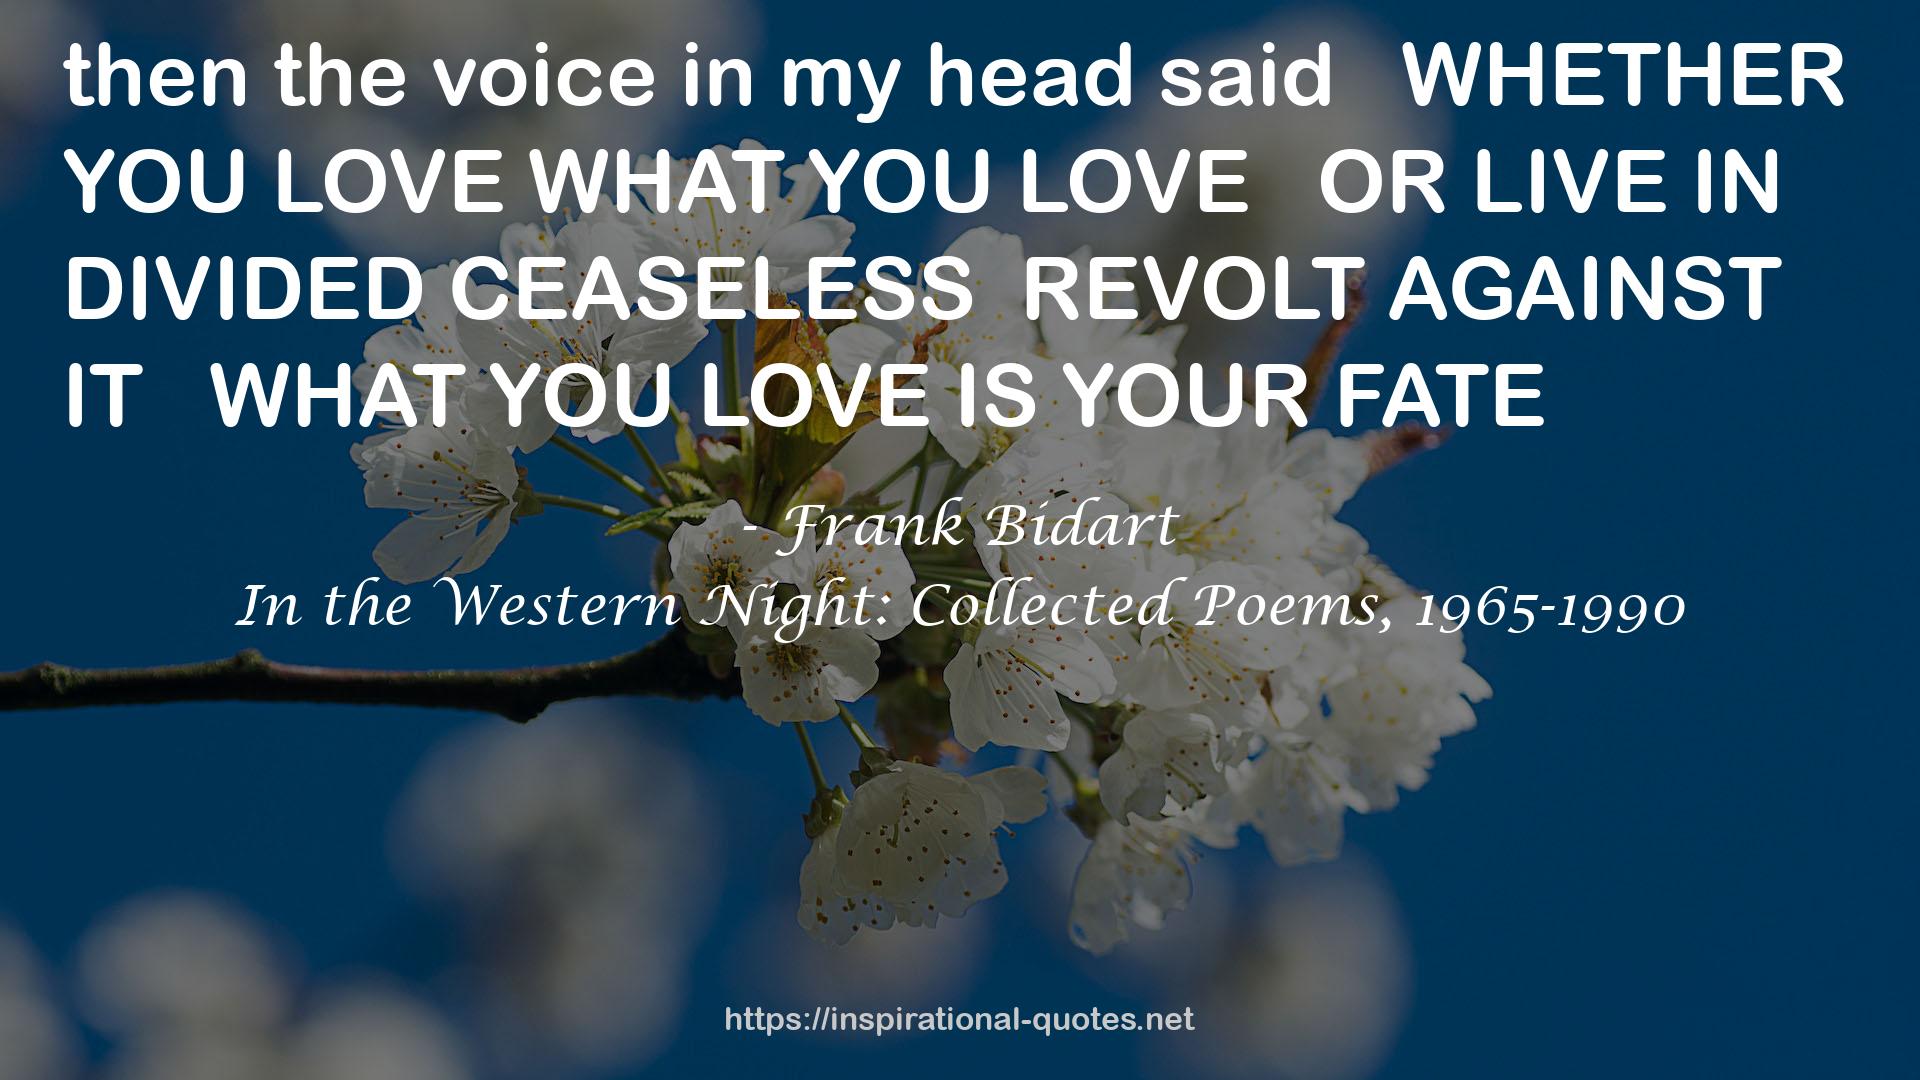 In the Western Night: Collected Poems, 1965-1990 QUOTES